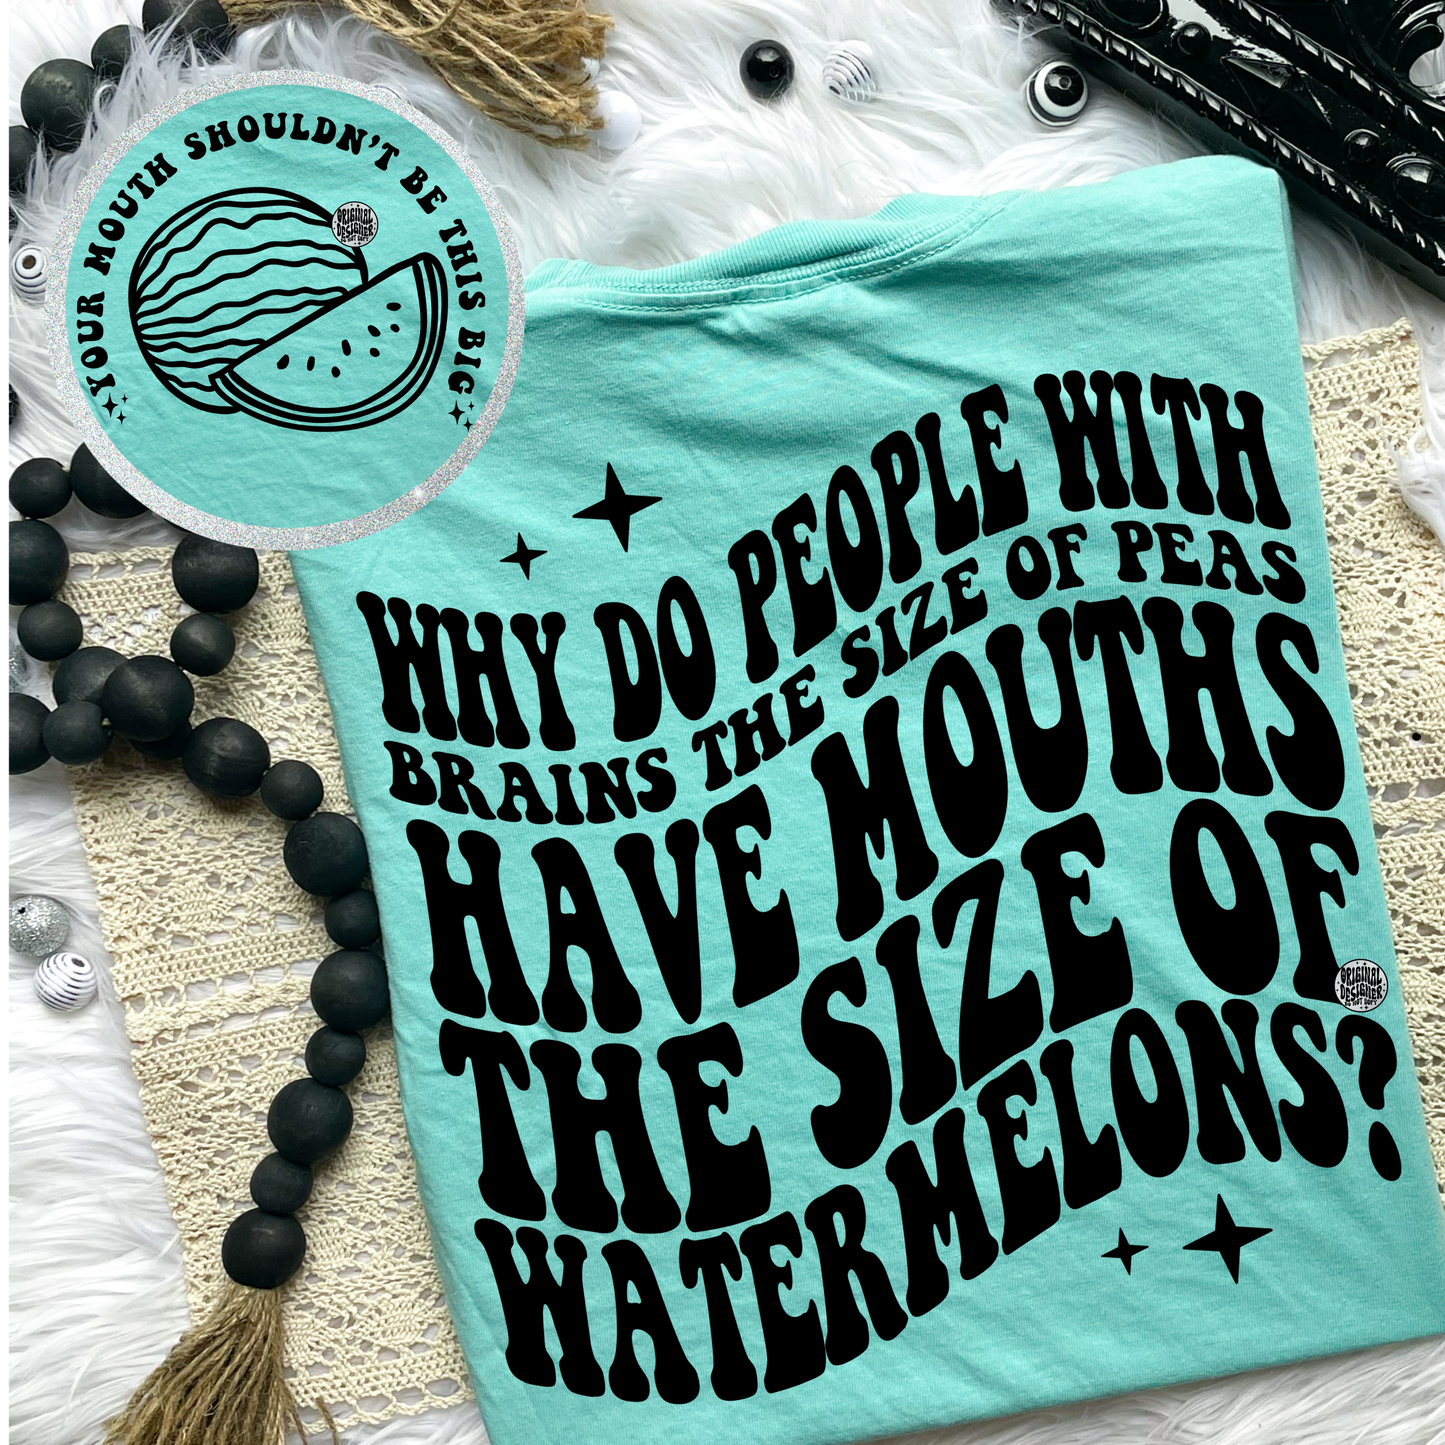 Mouths the size of Watermelons Comfort Colors Tee